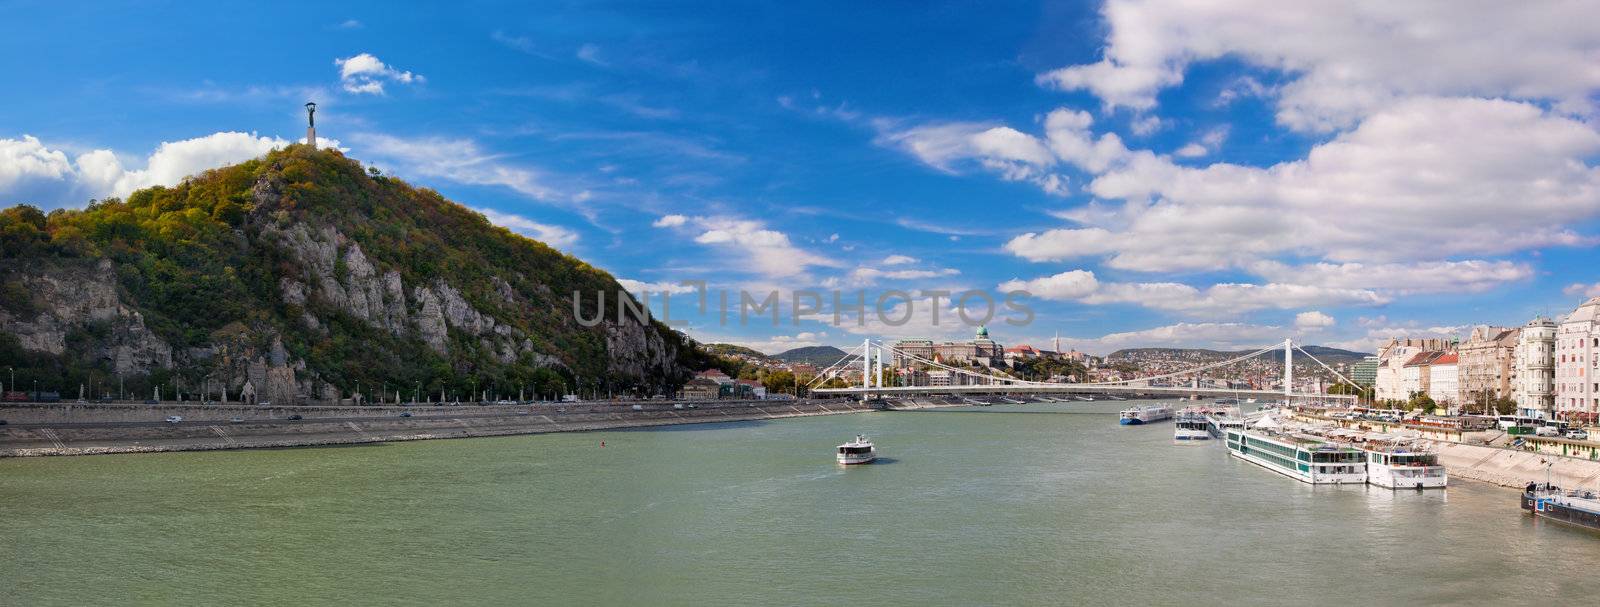 Gellert Hill and Danuber River. Budapest, Hungary. by photocreo